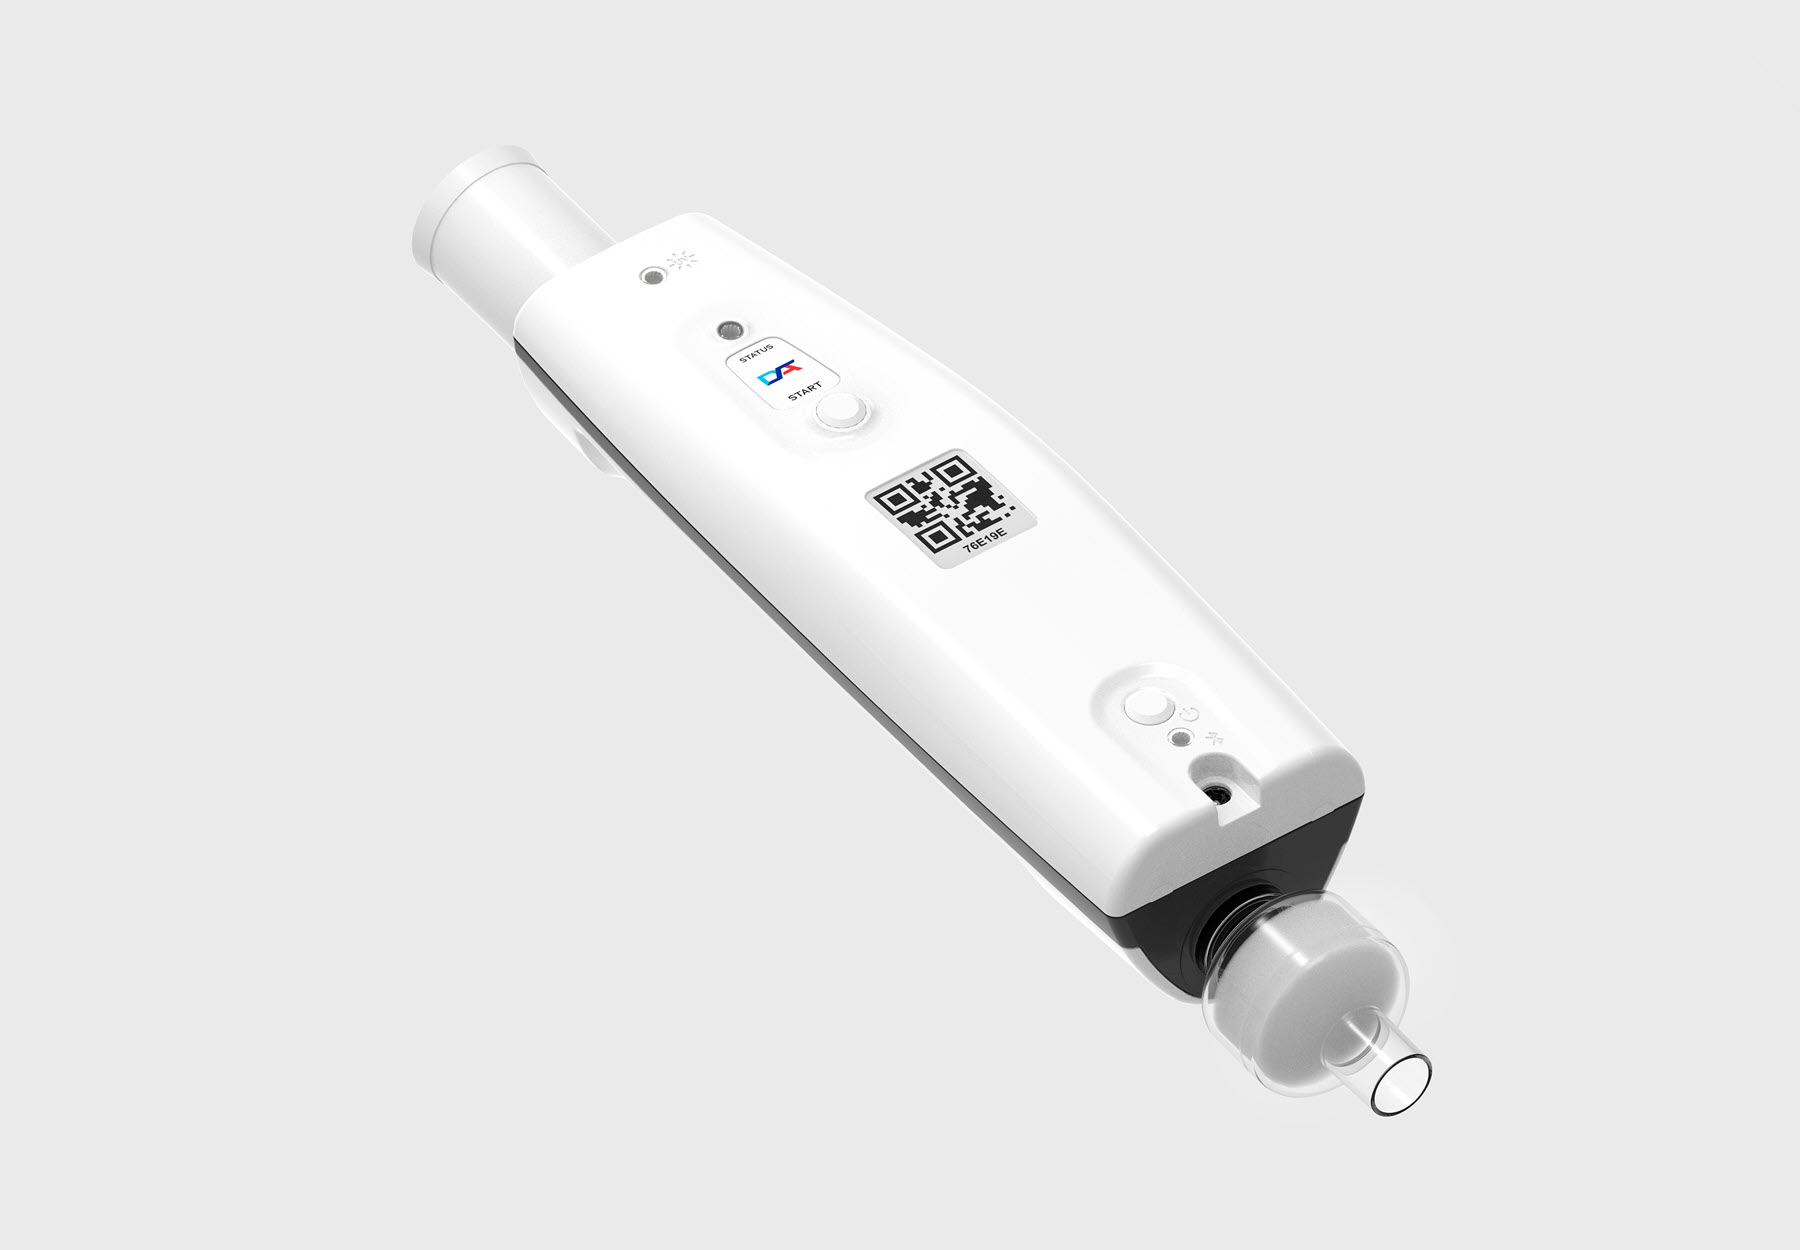 An image of the DSA BreathPass COVID-19 breathalyzer test device